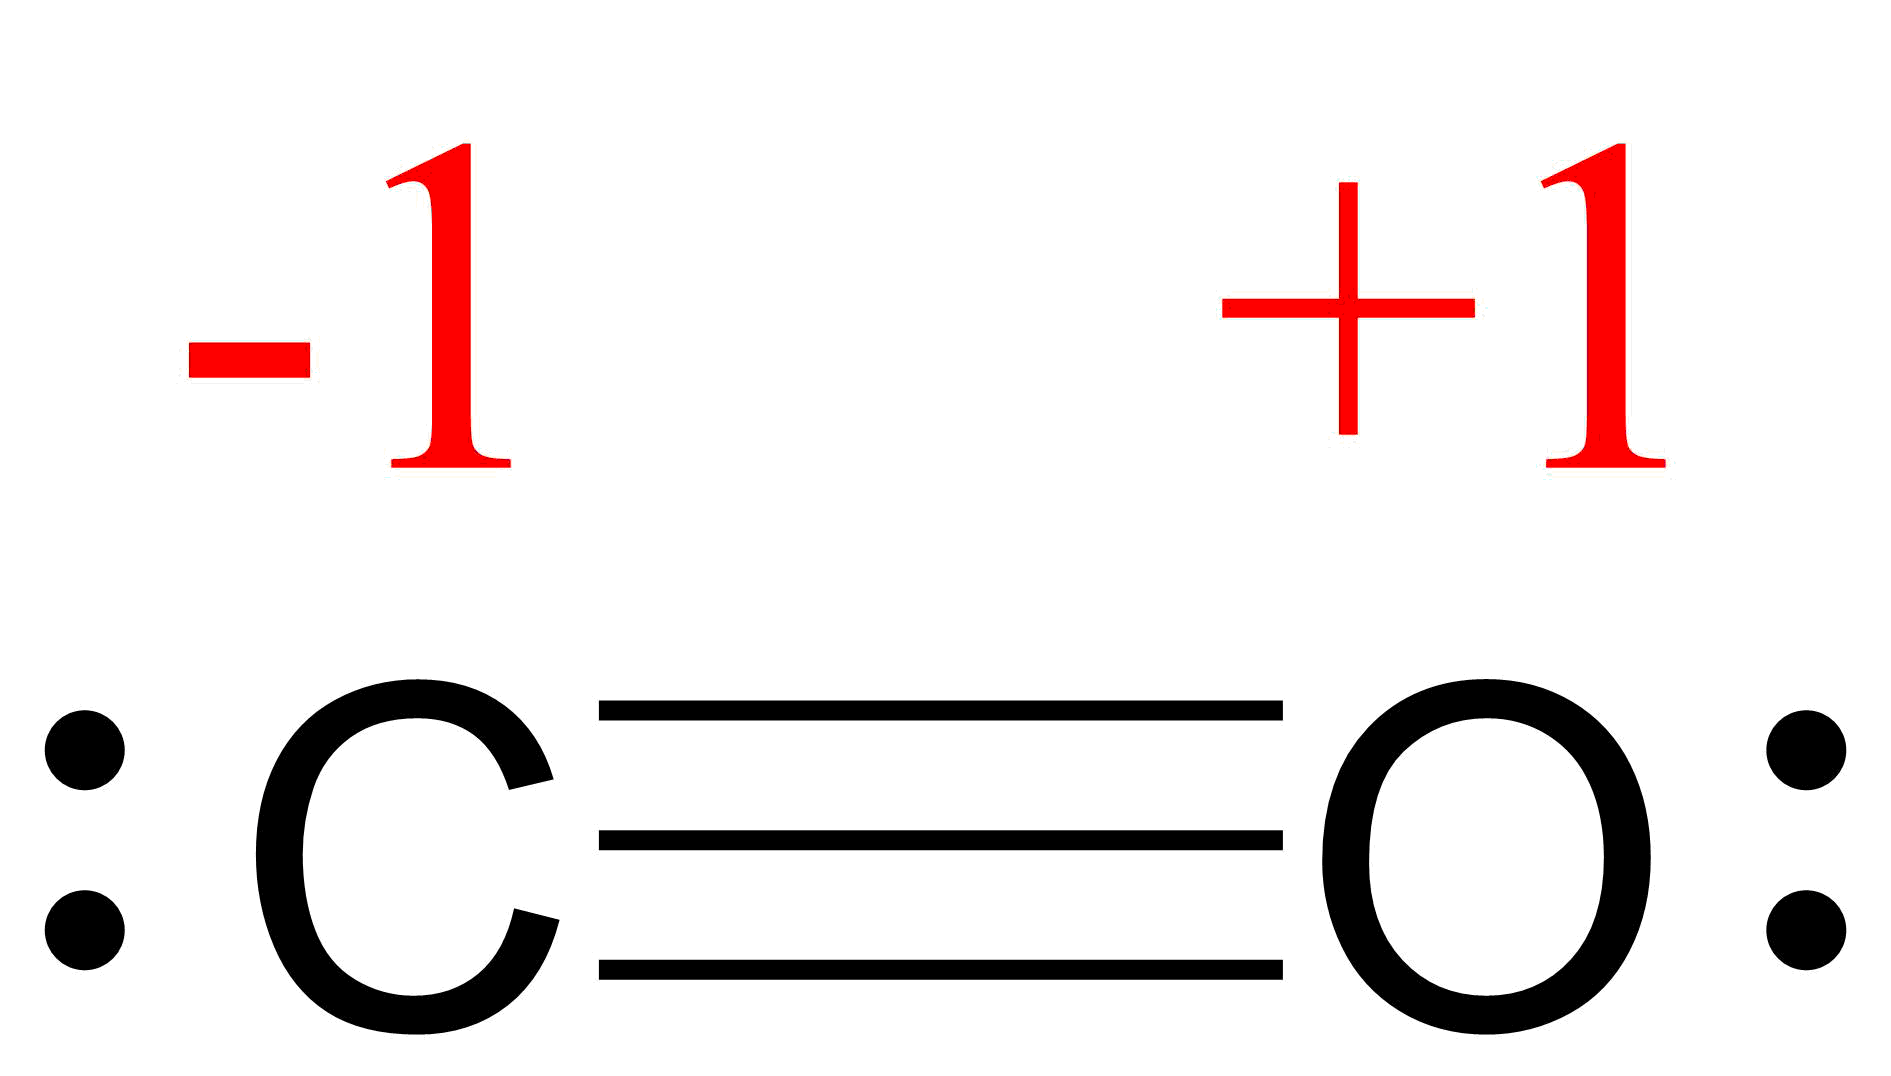 Lewis structure for CO. Carbon is triple bonded to the oxygen atom. Each atom has a lone pair. This gives the carbon atom a formal charge of minus 1, and the oxygen a formal charge of plus 1.